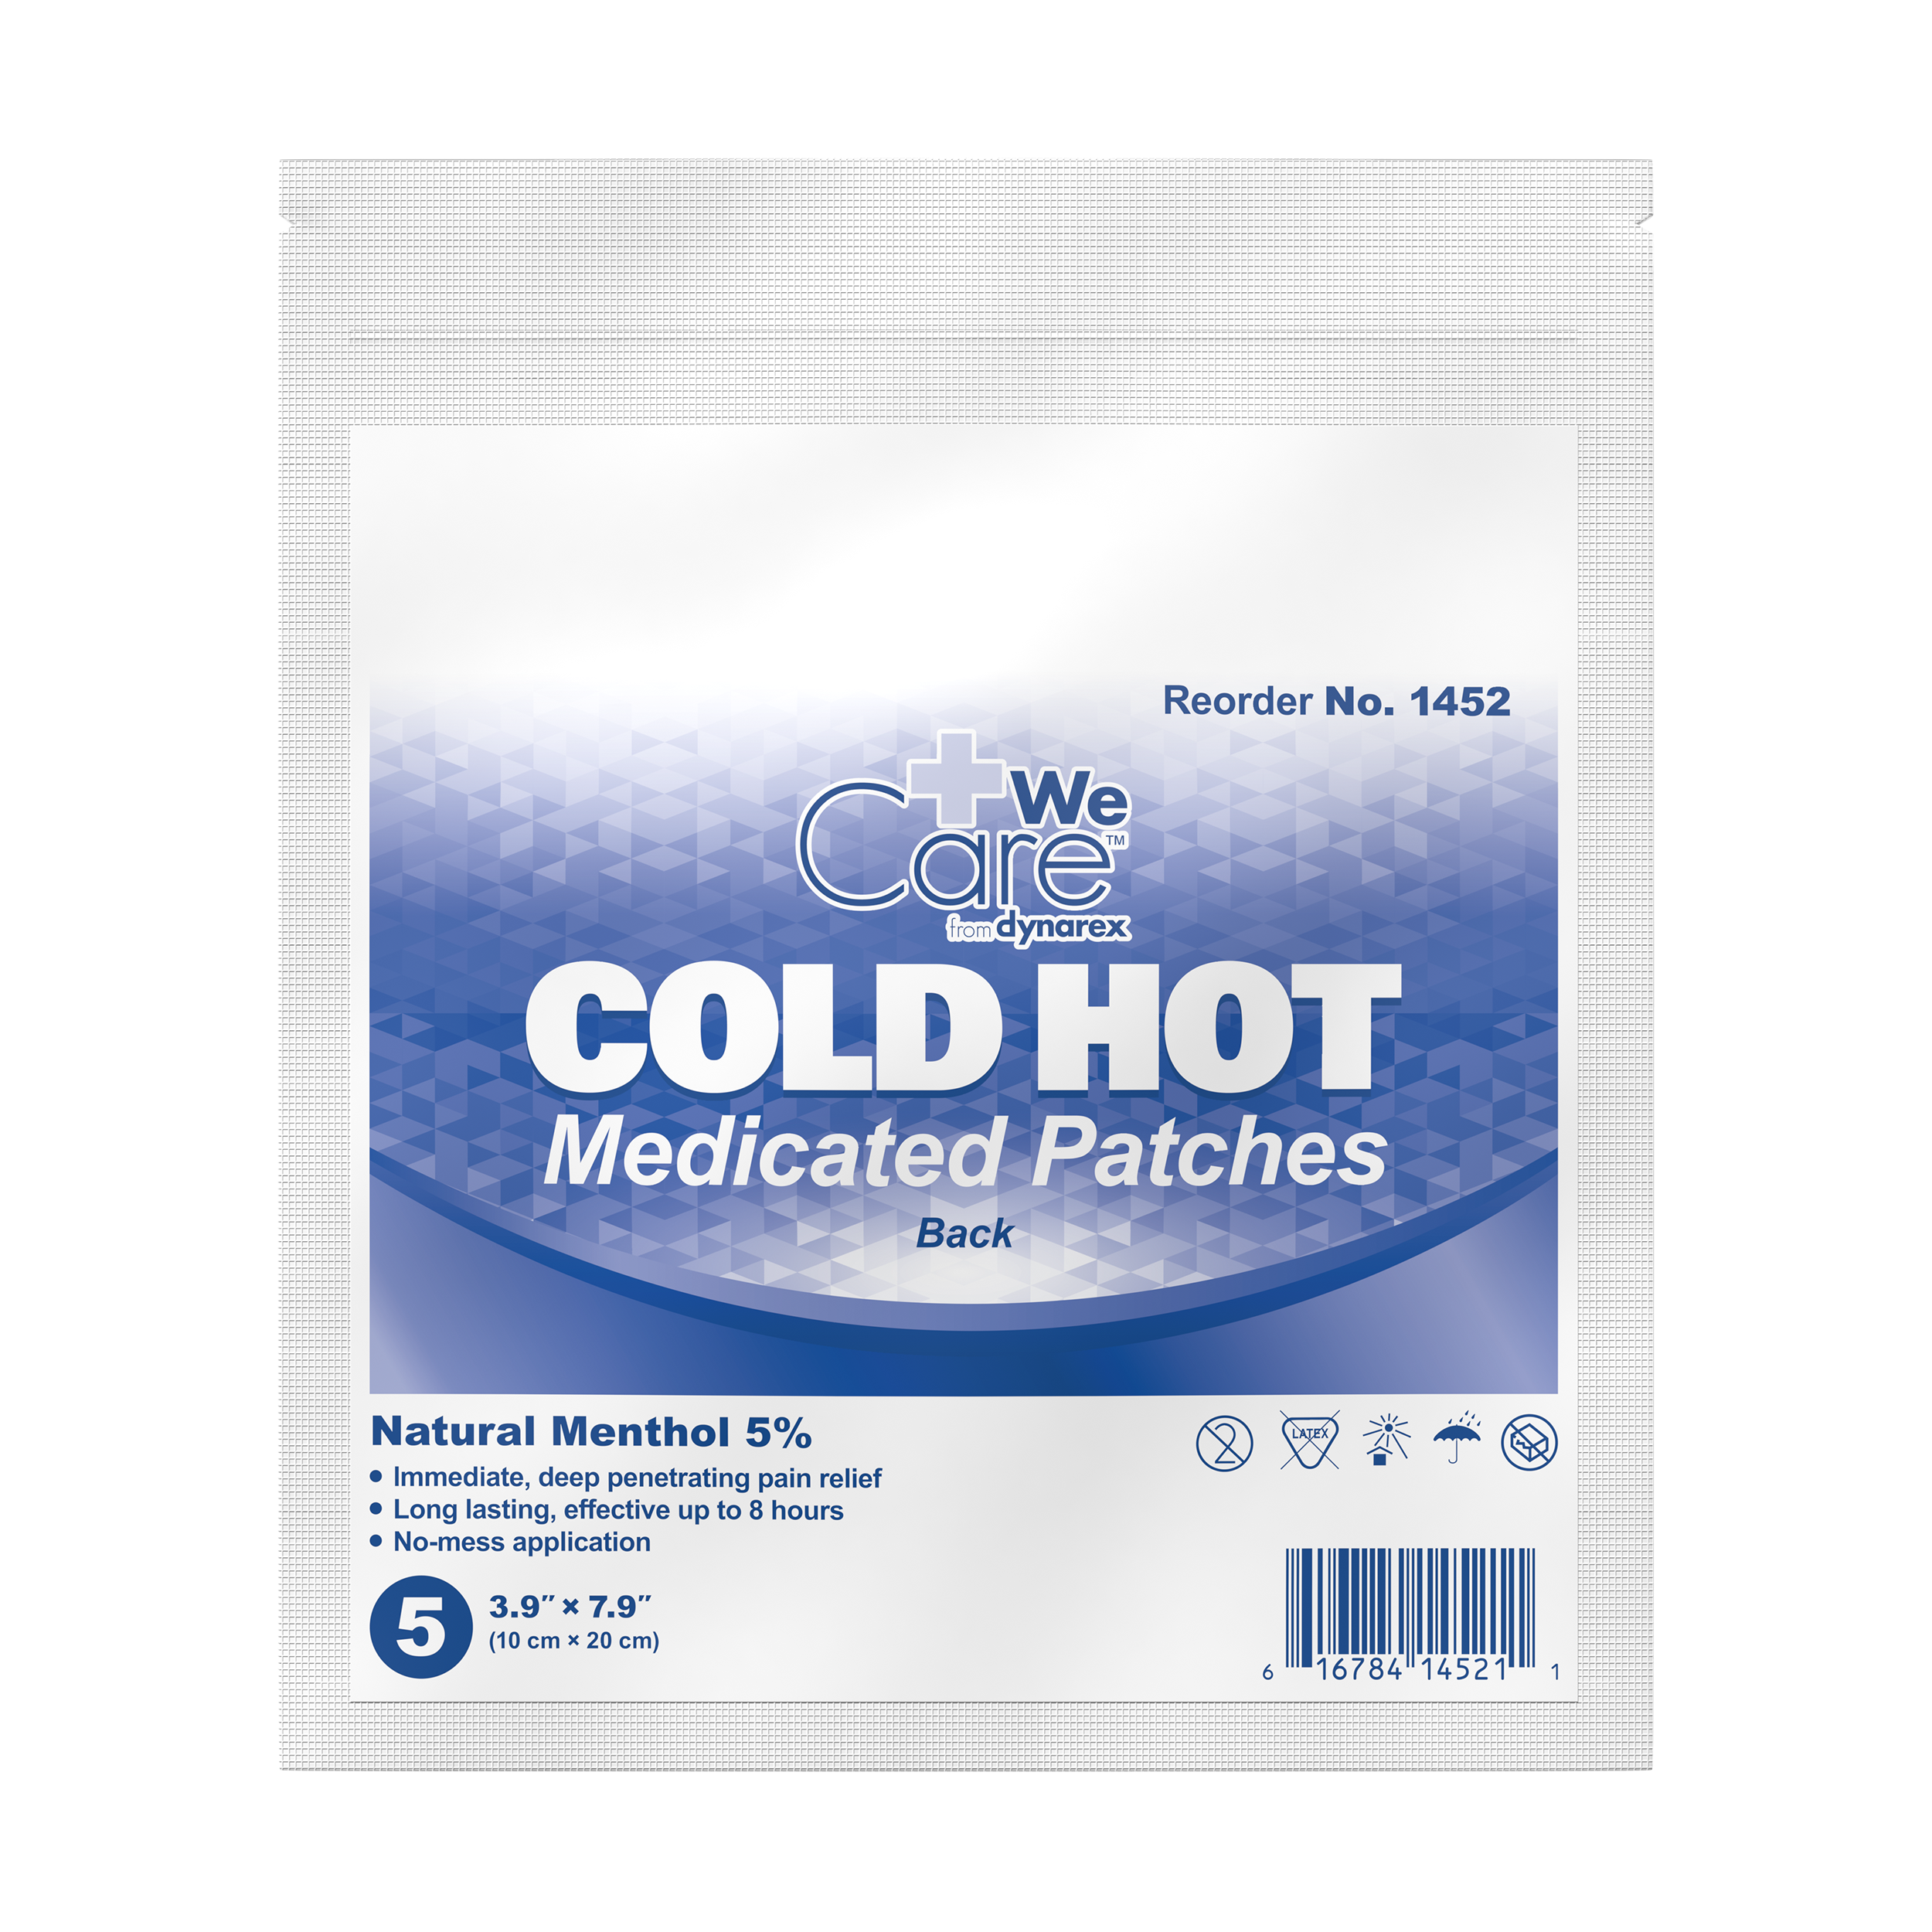 Cold Hot Medicated Patches - Back